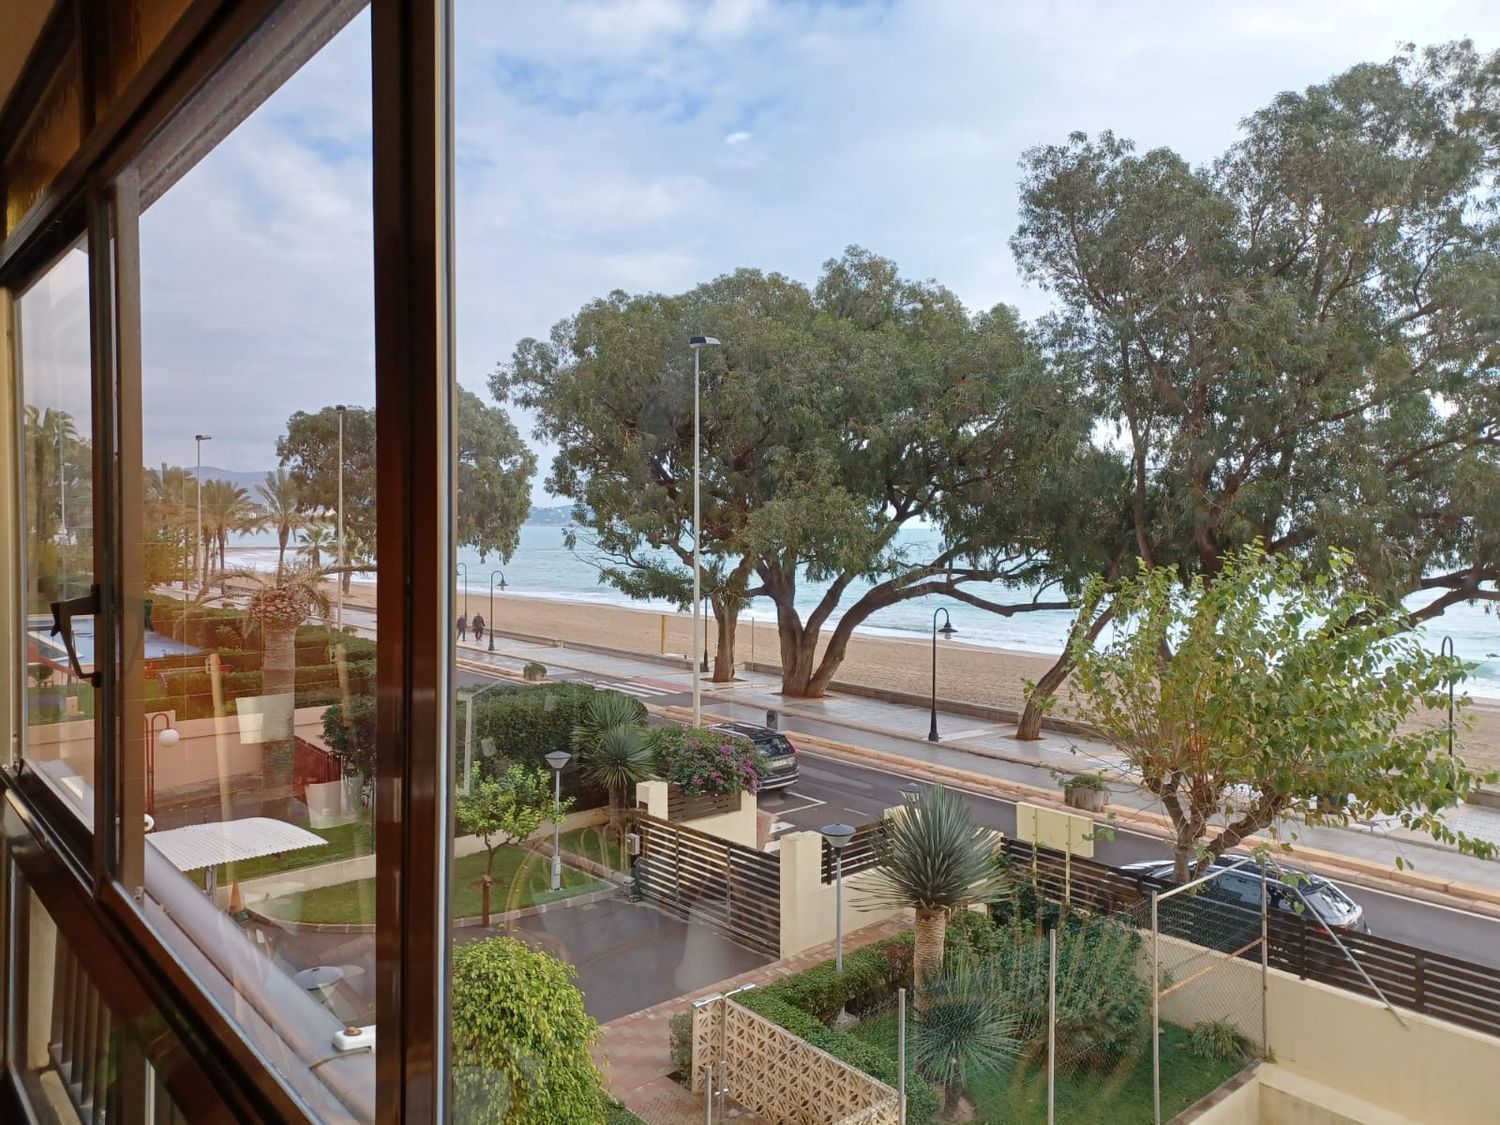 Apartment for sale on the seafront on Ferrandis Salvador avenue, in Benicàssim